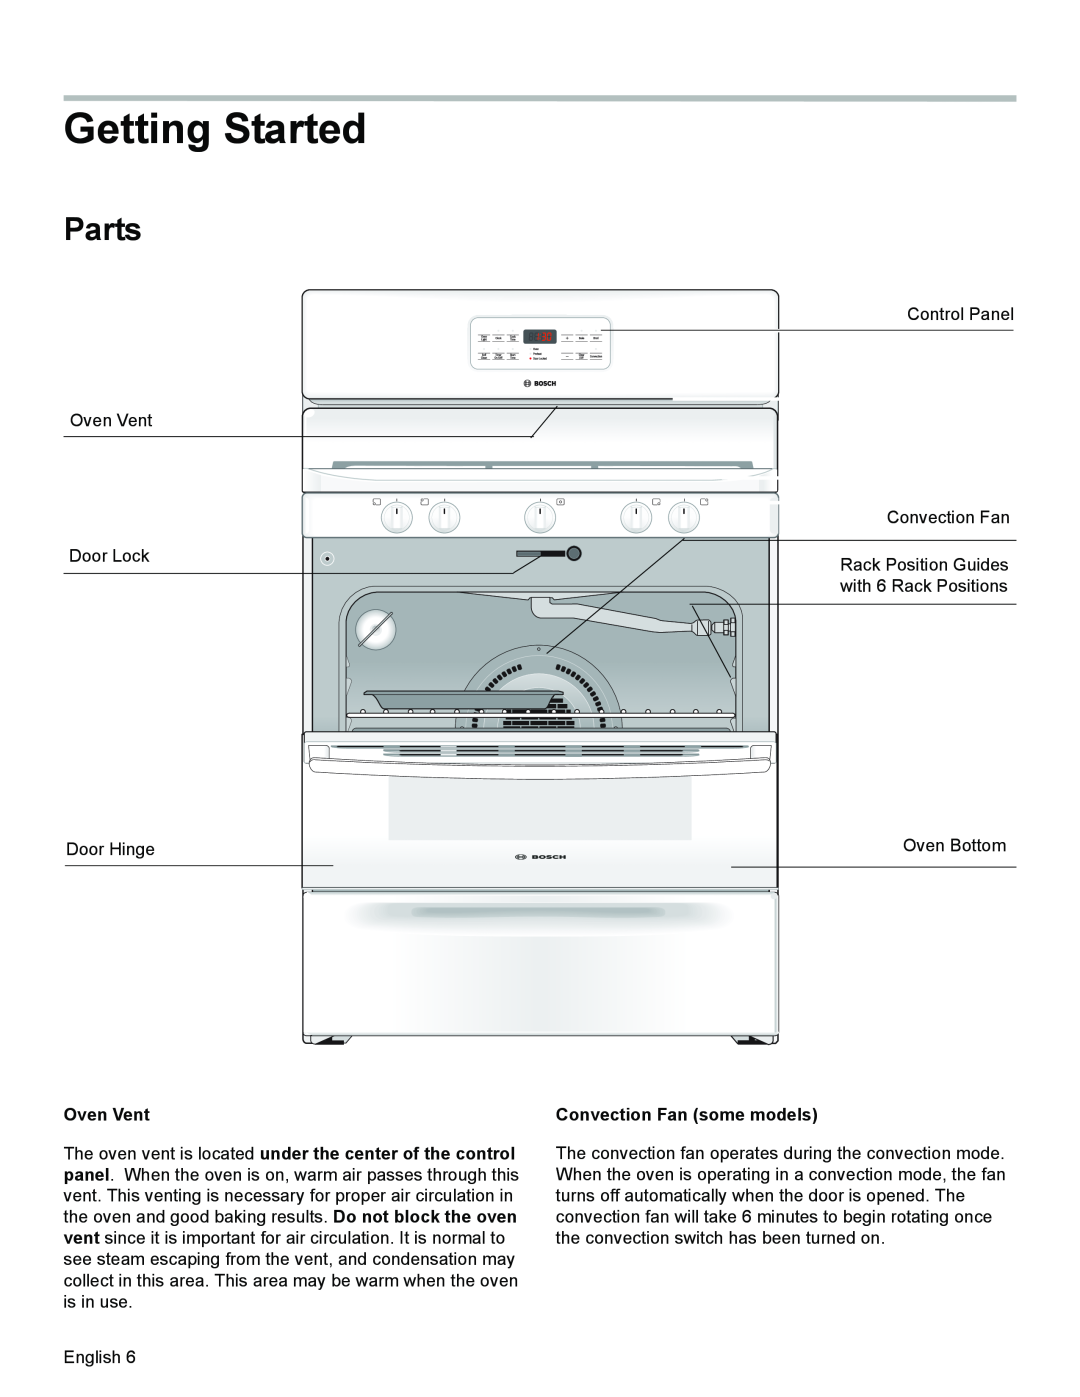 Bosch Appliances HGS3023UC manual Getting Started, Parts, Oven Vent, Convection Fan some models 